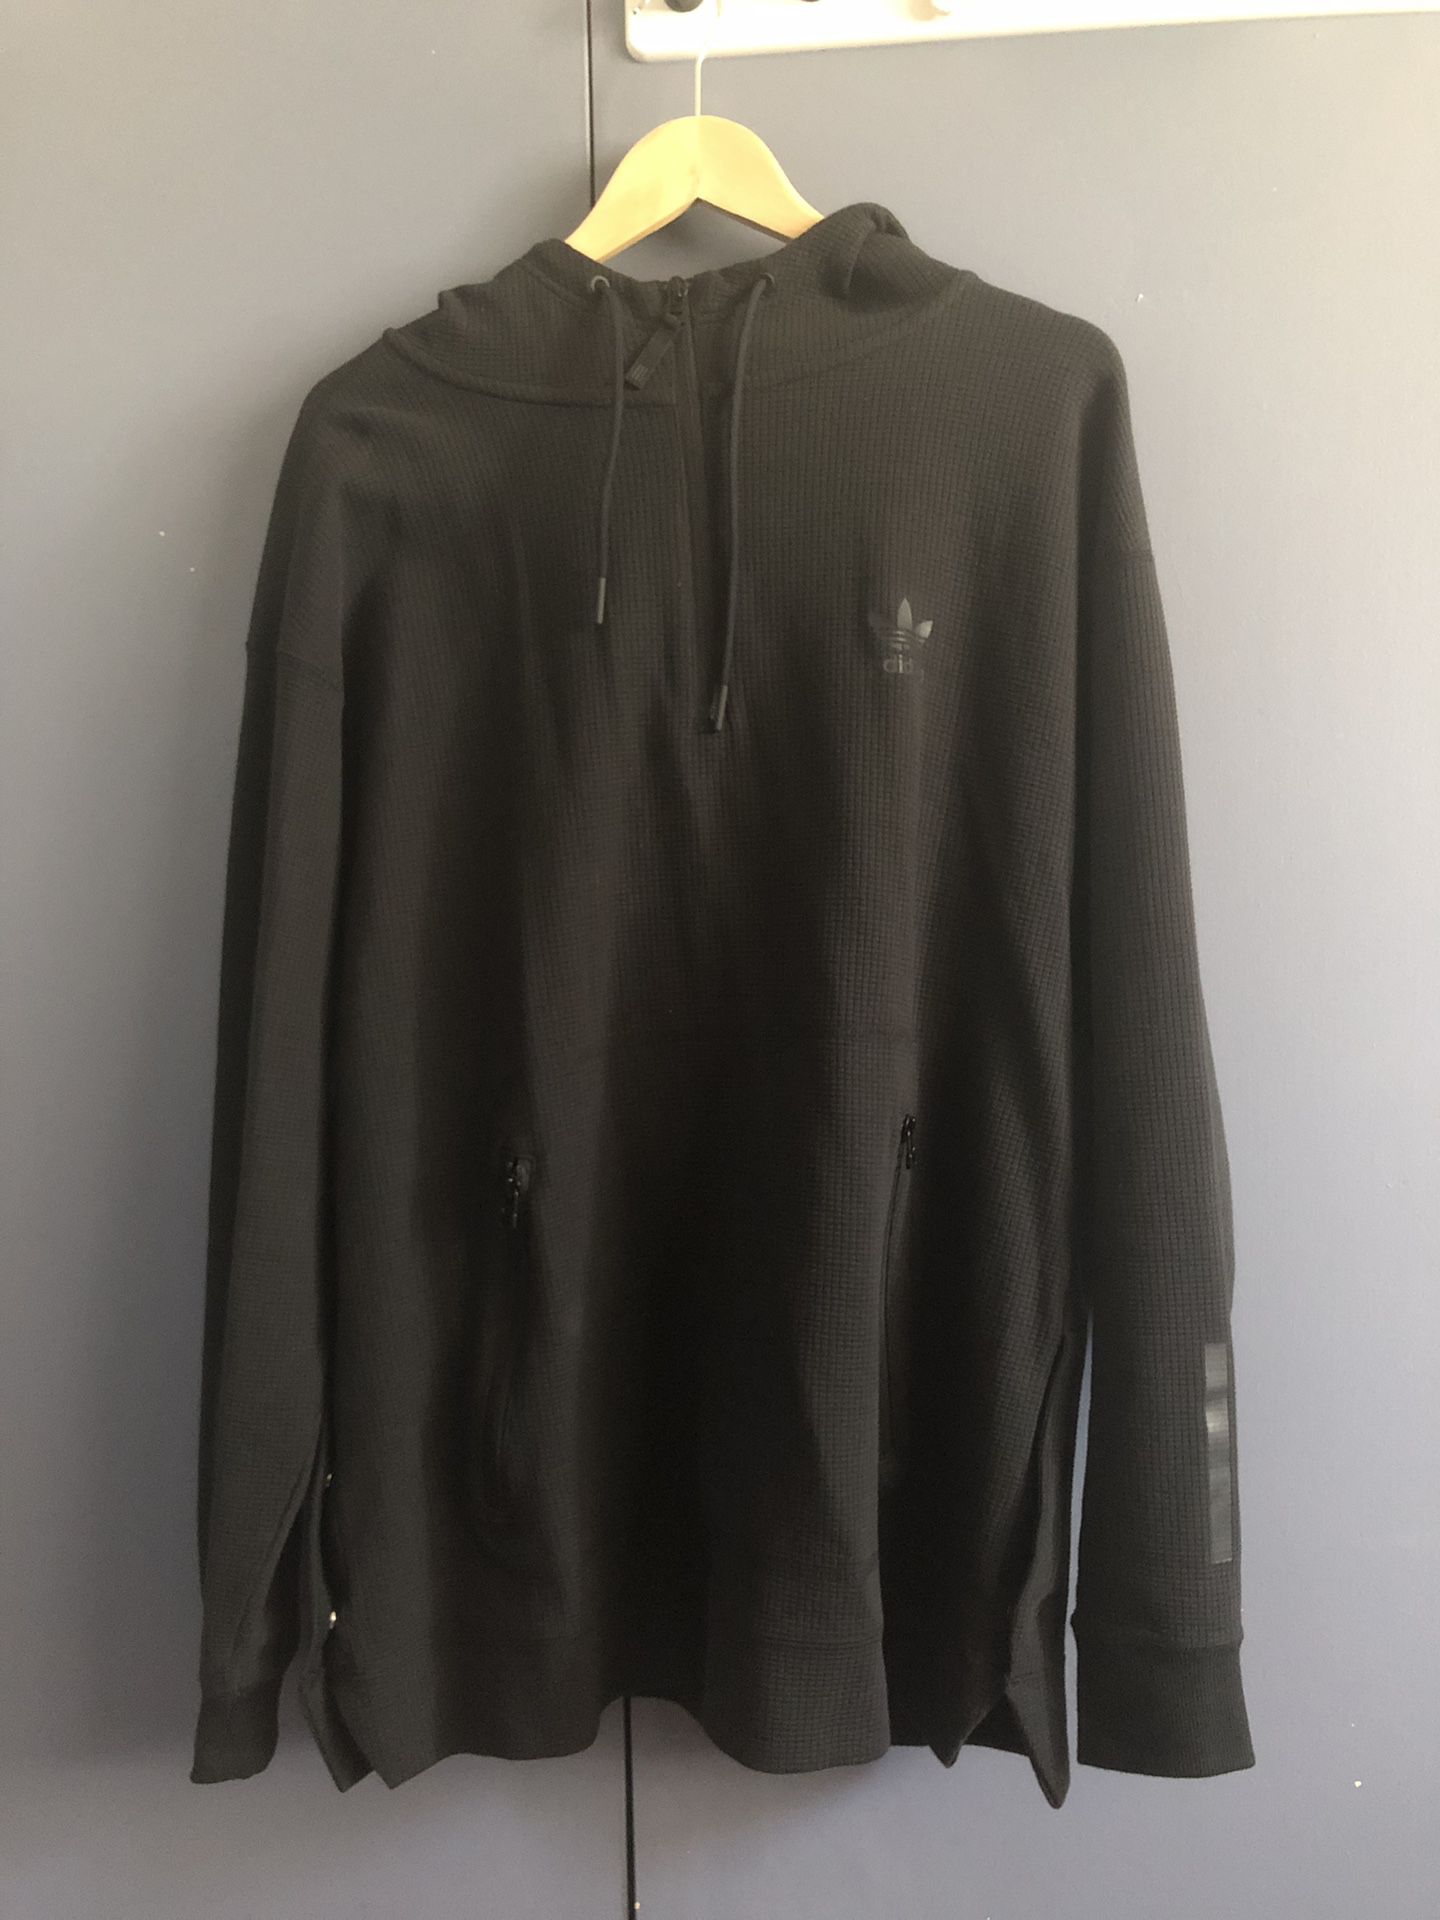 Adidas Parka style pull over hoodie